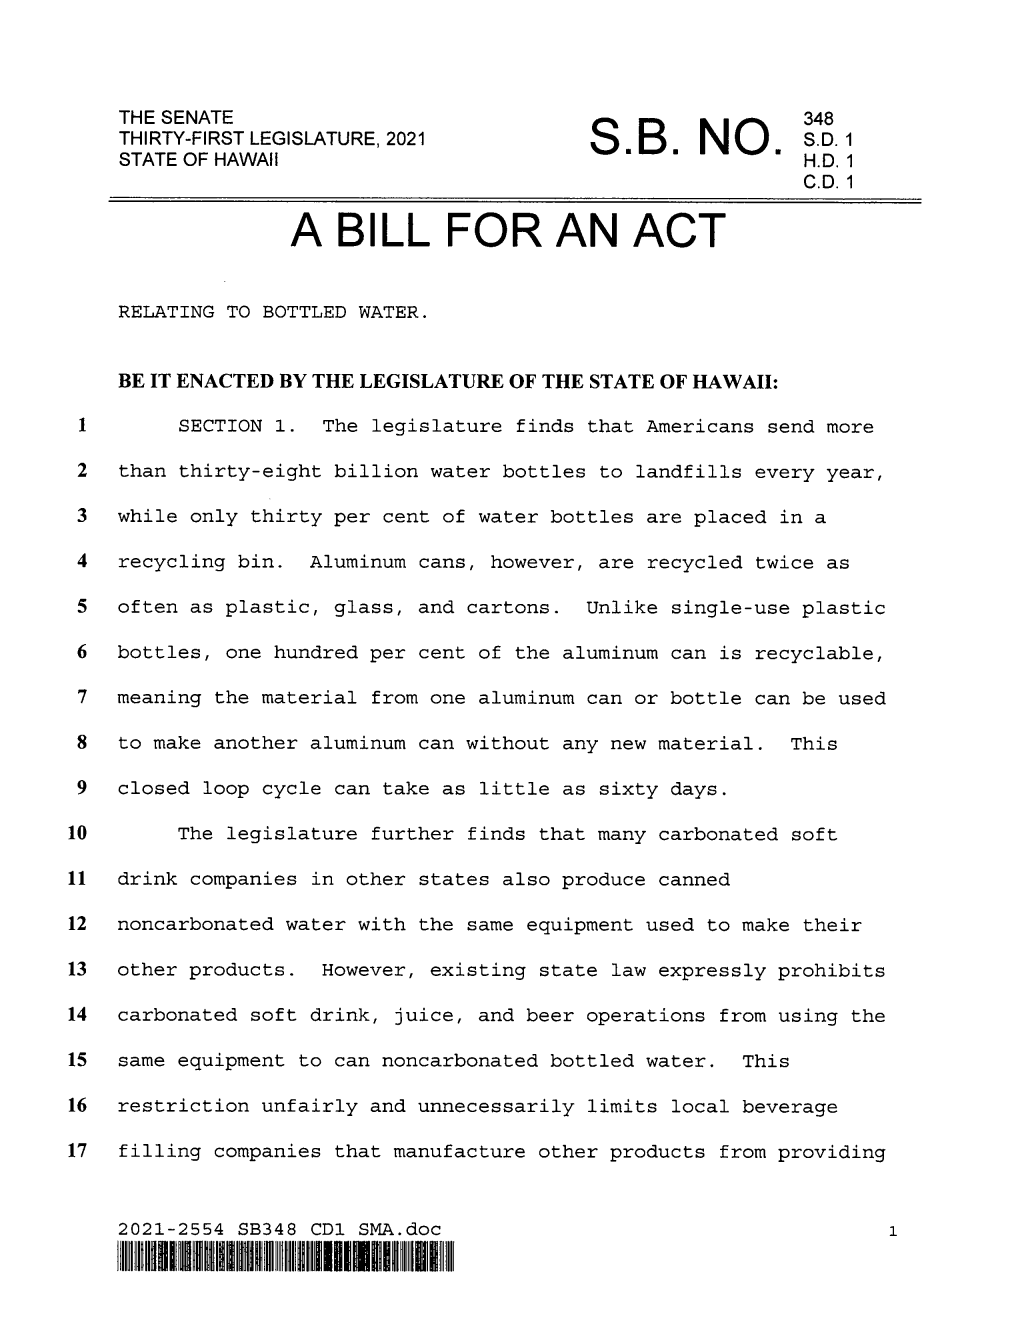 A Bill for an Act